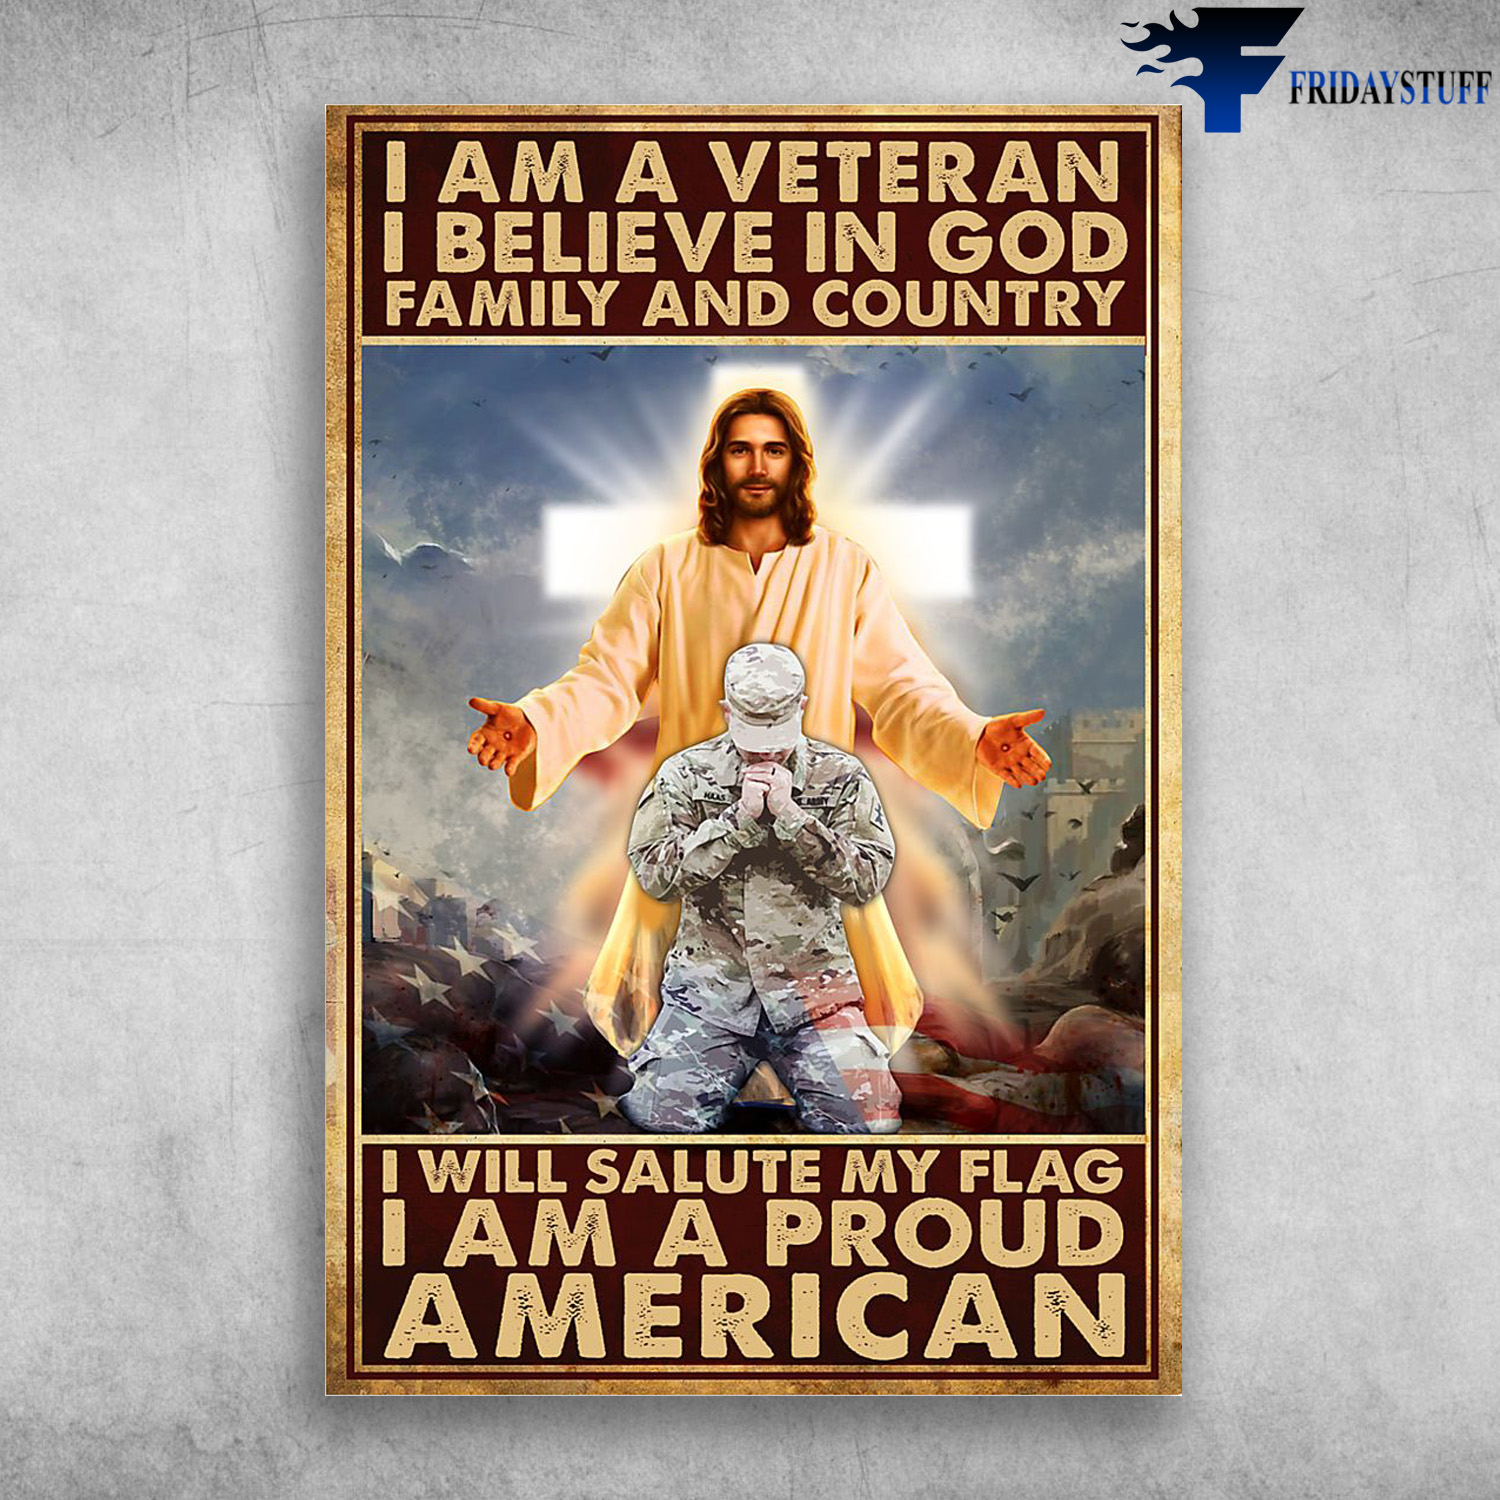 God And Soldier - I Am A Veteran, I Believe In God, Family And Country